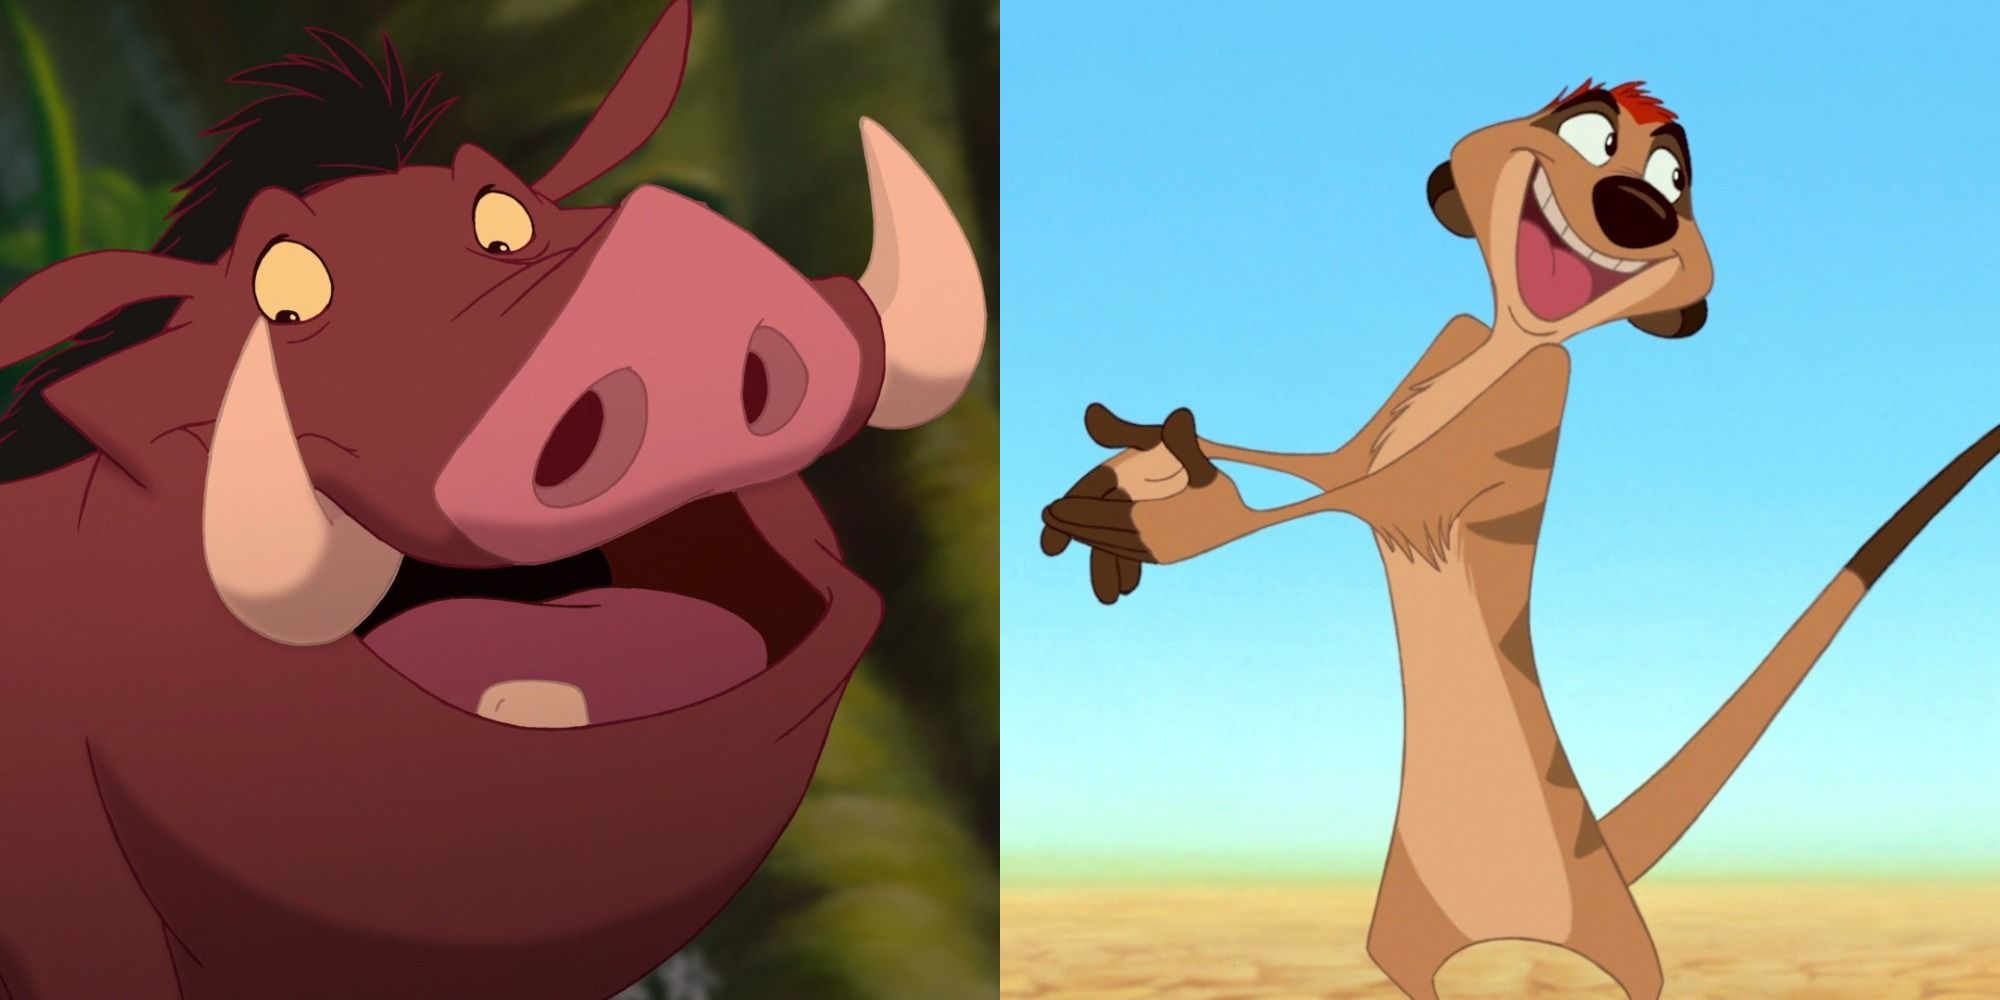 Side by side images of Pumbaa and Timon smiling in The Lion King 1994